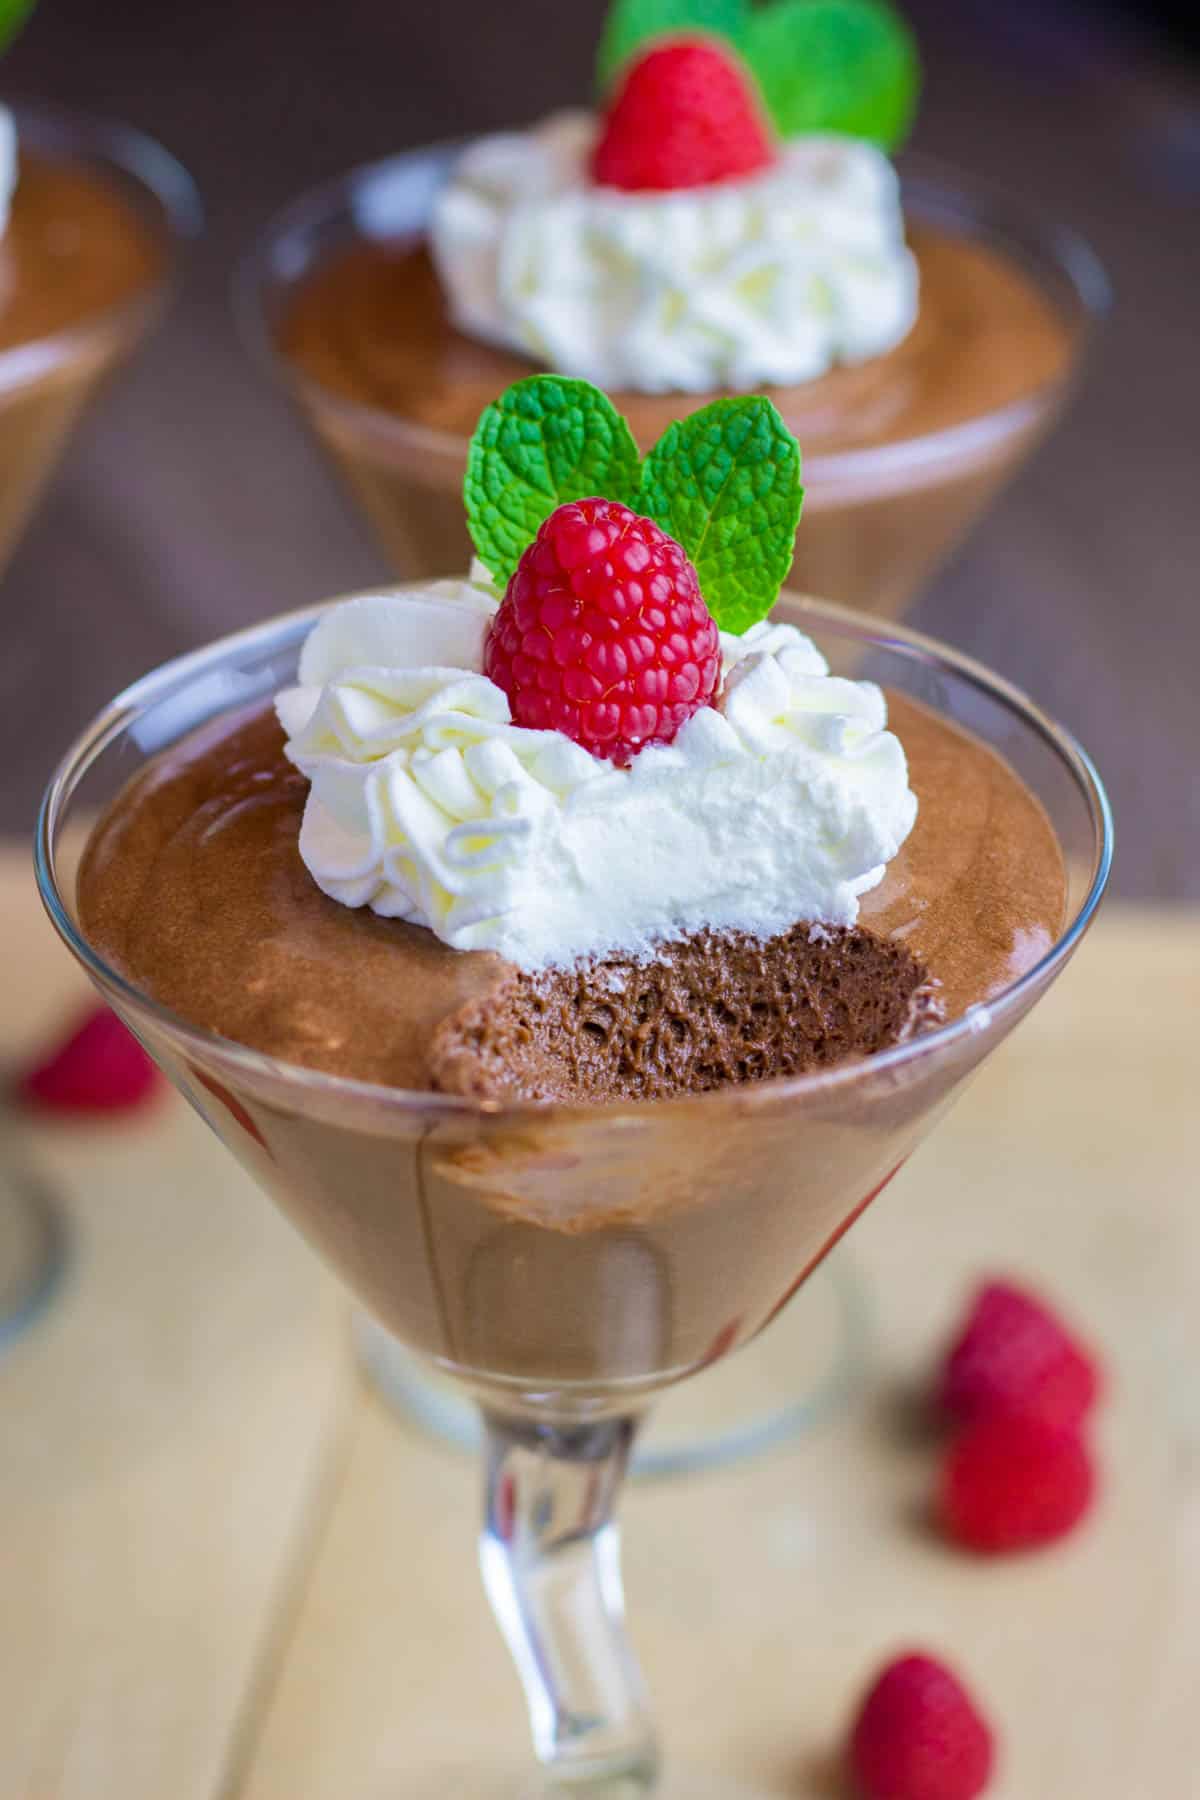 Chocolate mousse, topped with whipped cream, raspberry, and mint leaves.